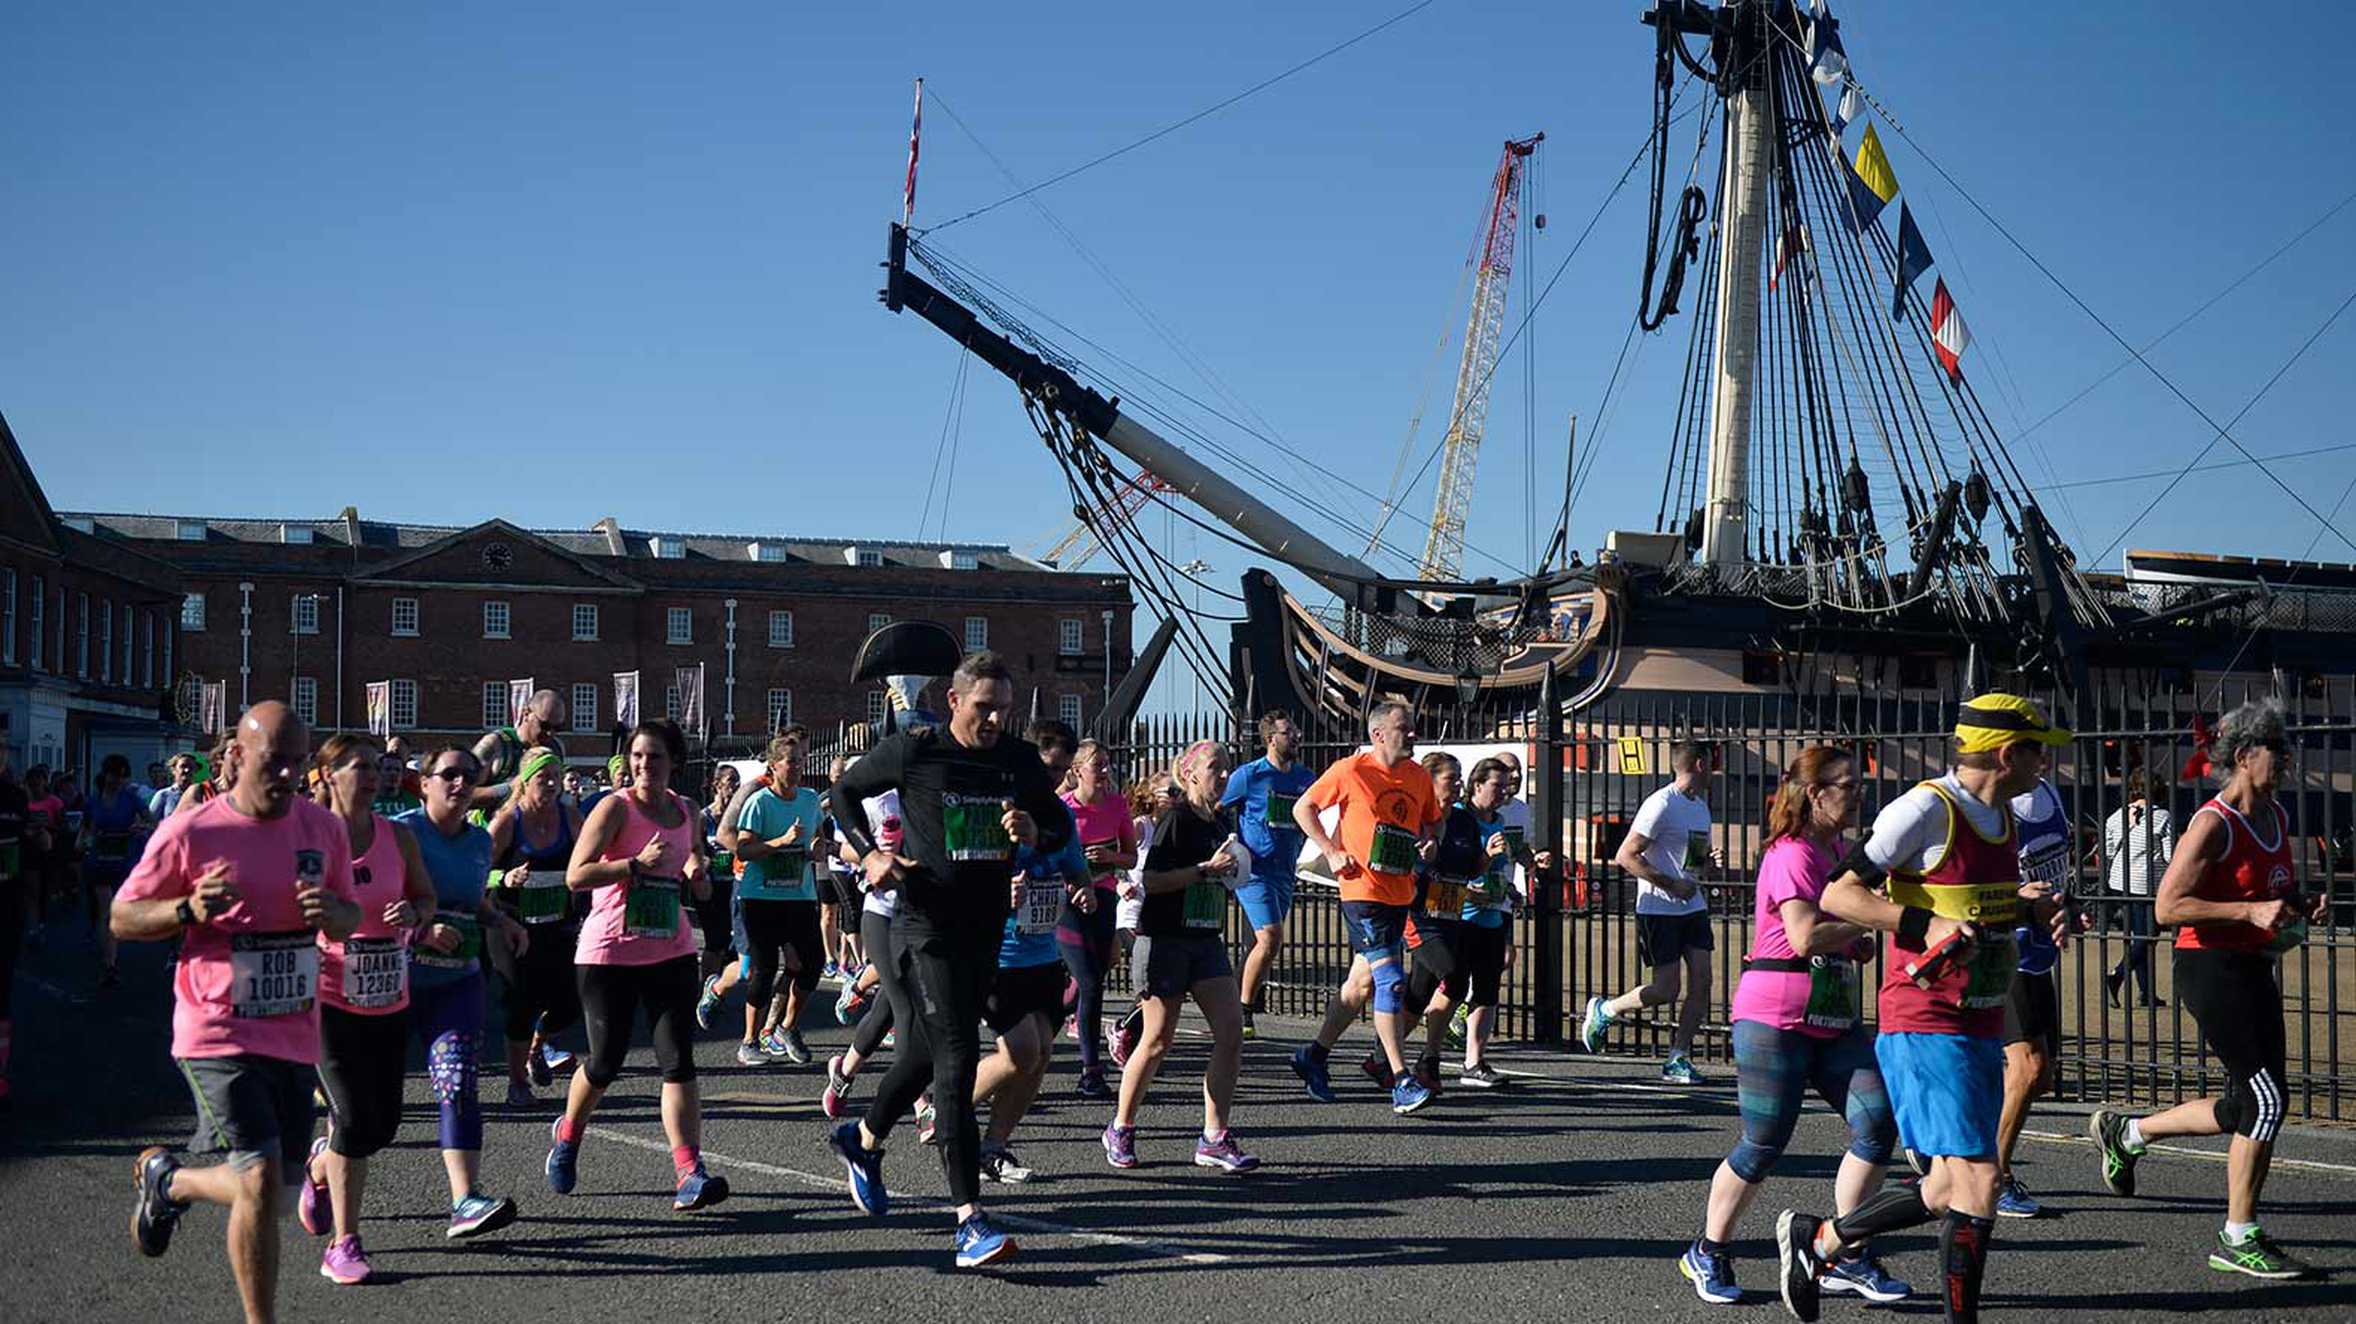 Runners passing a historic ship during the Great South Run.